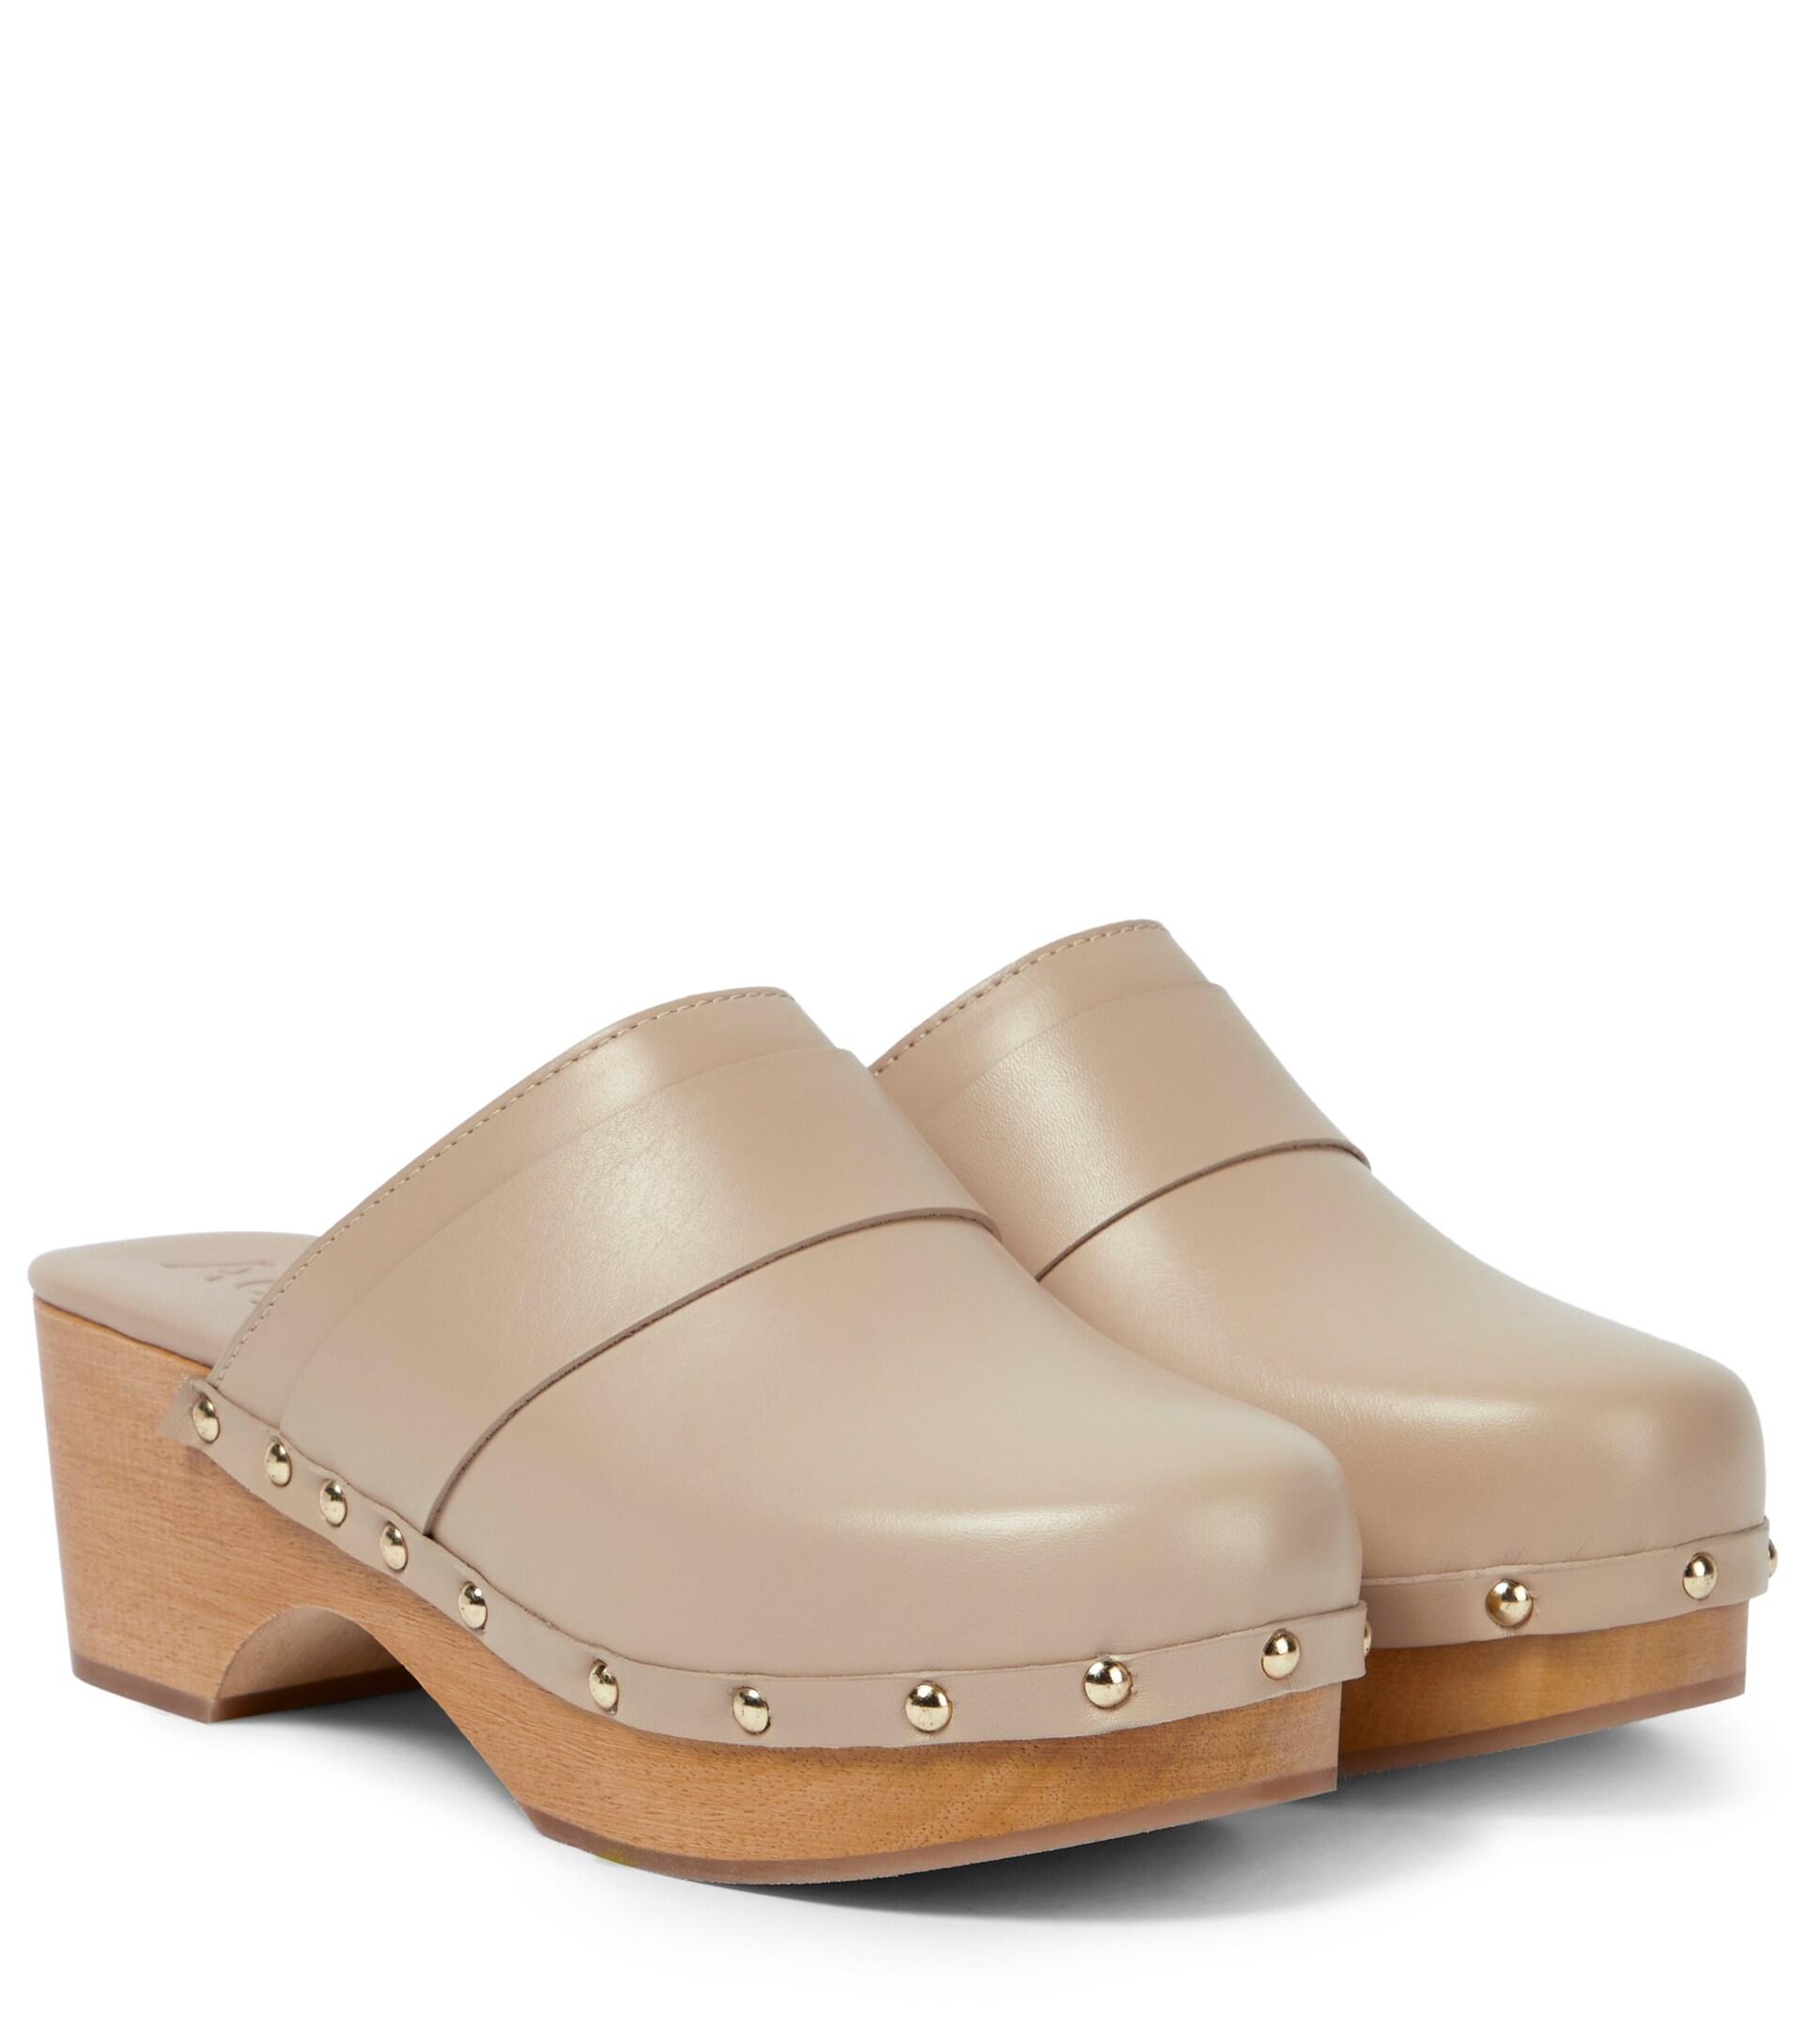 Aeyde Bibi Leather Clogs in Brown | Lyst